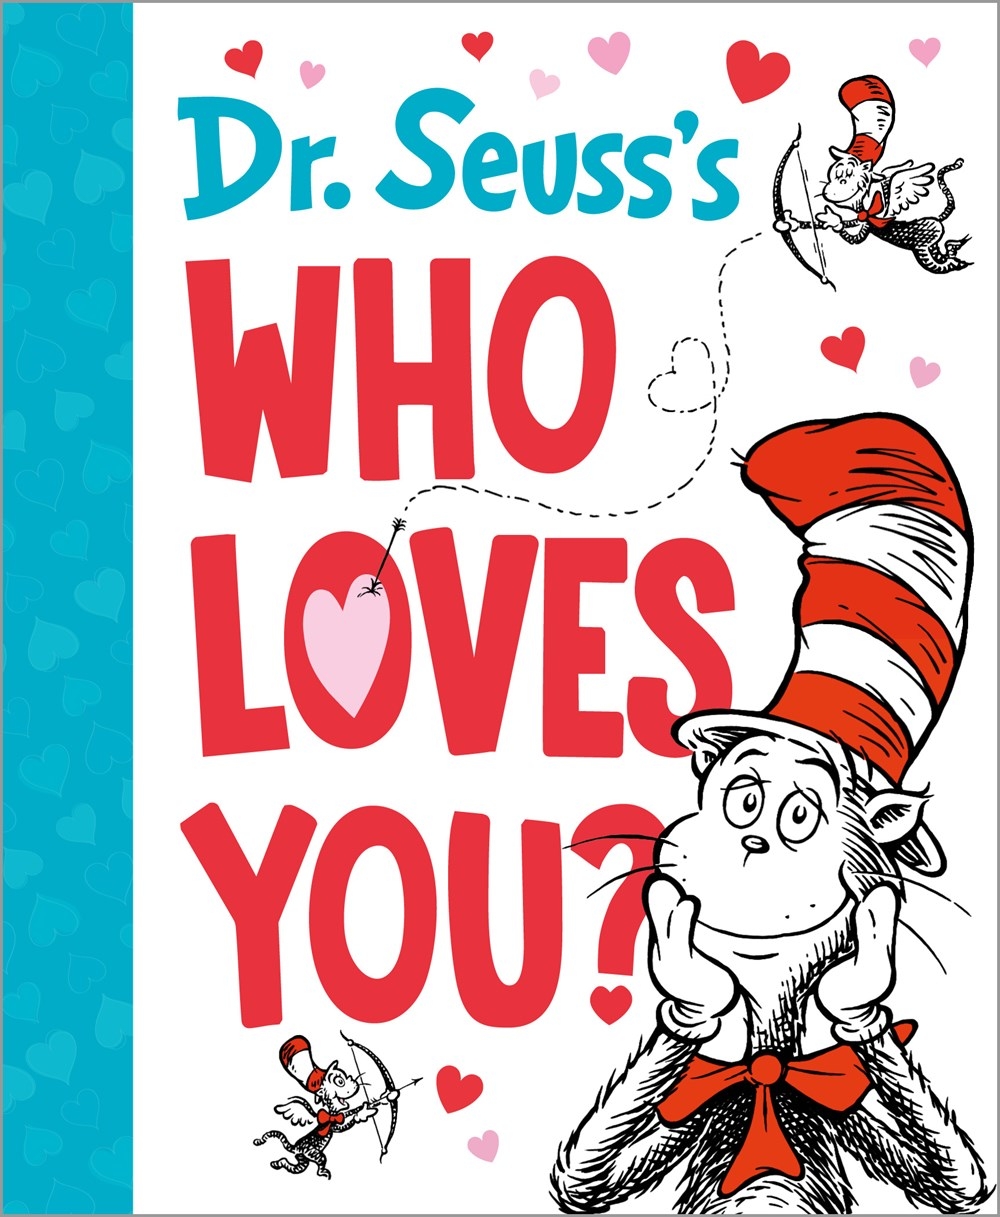 Dr. Seuss’s Who Loves You?